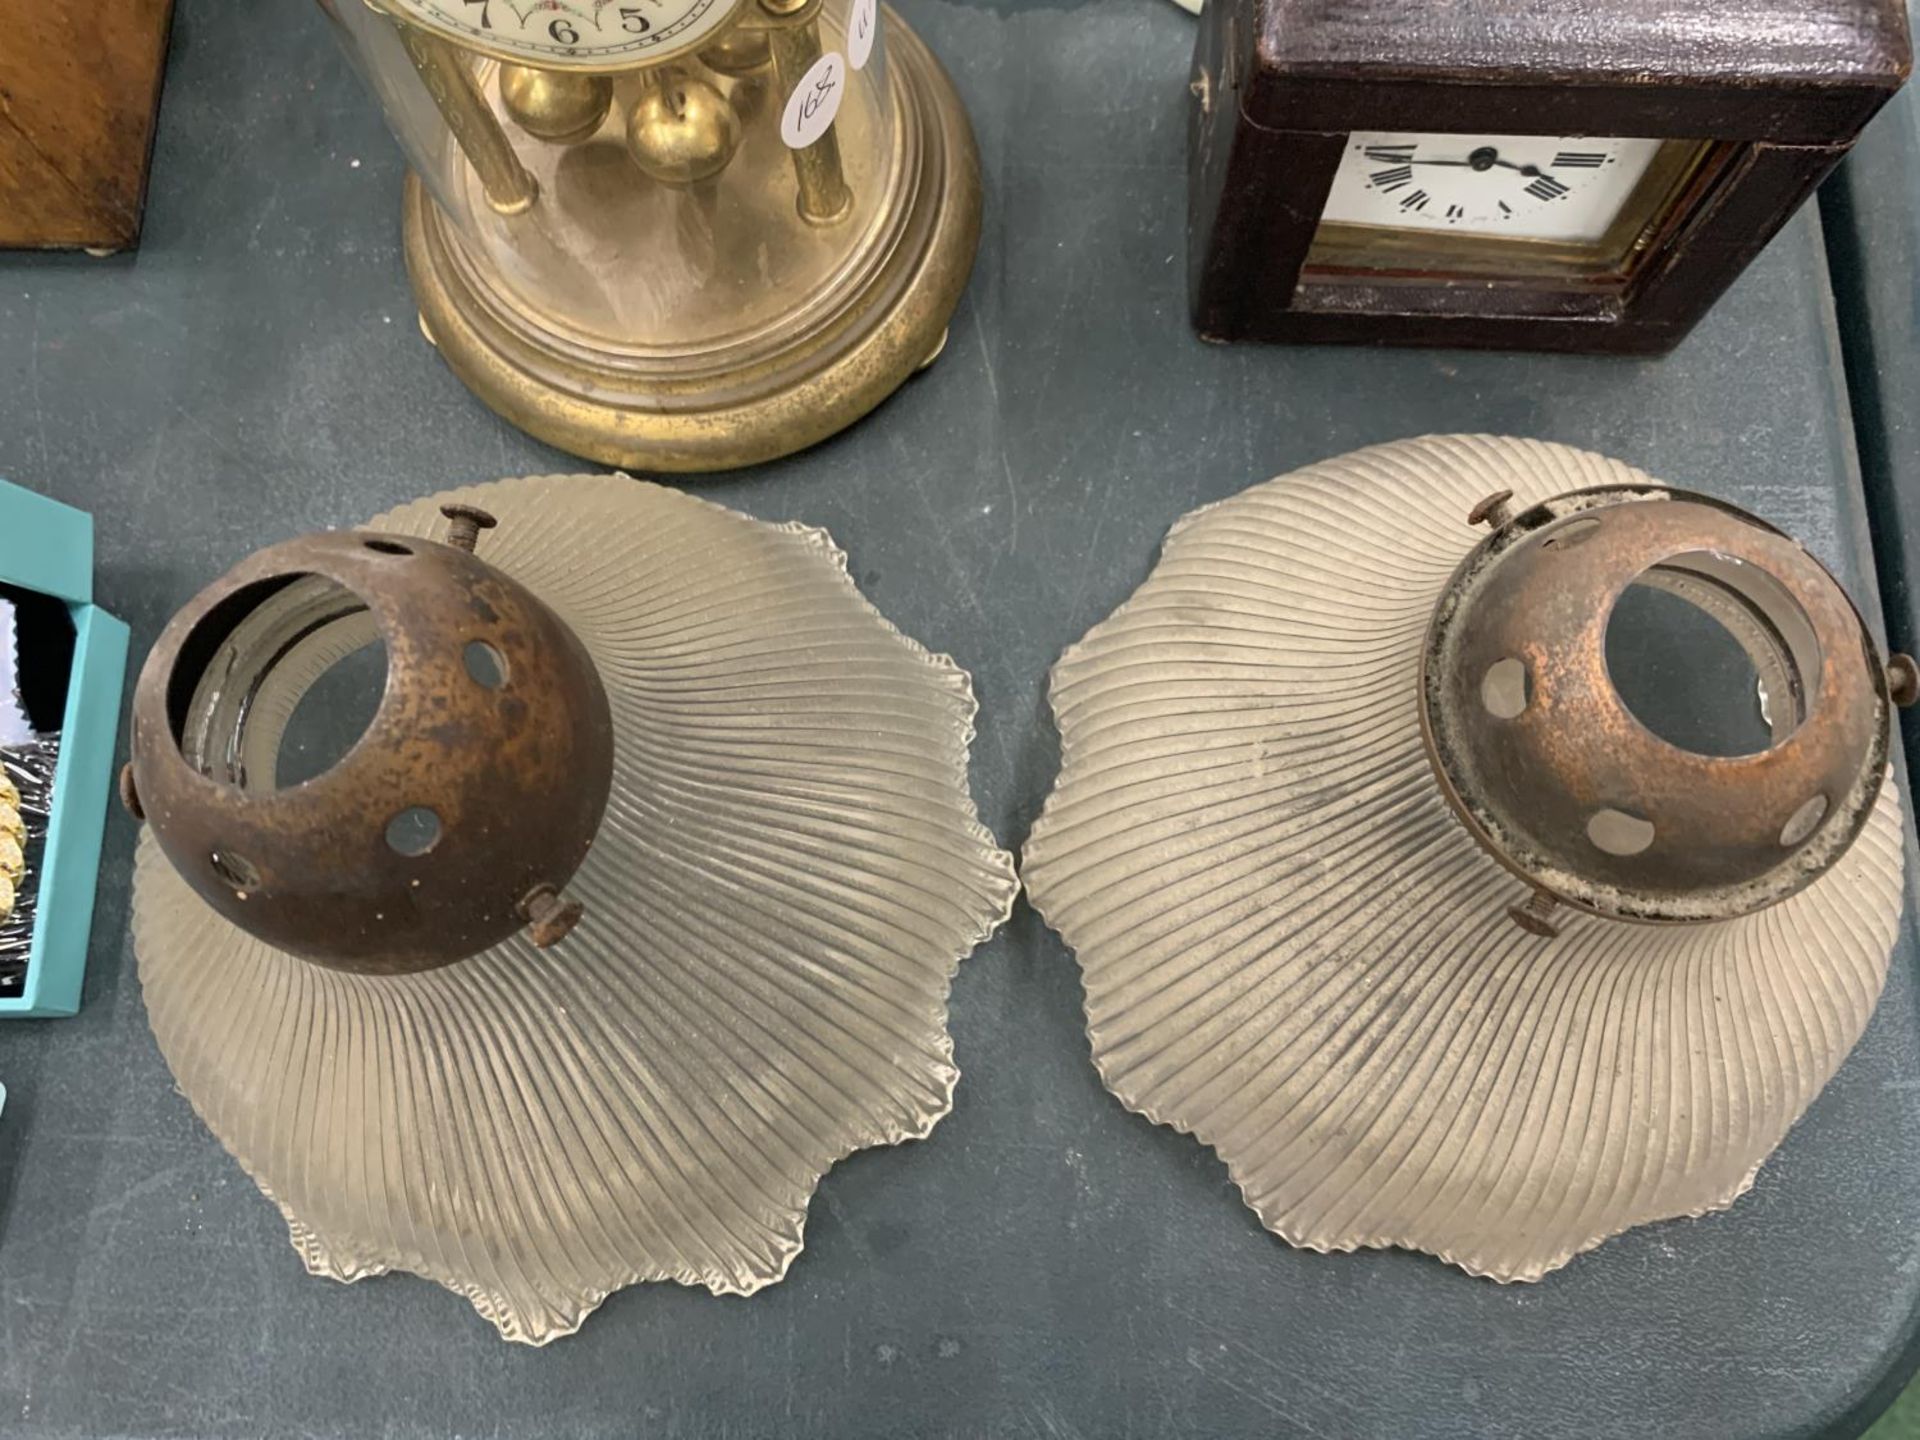 TWO VINTAGE GLASS LIGHT SHADES WITH METAL FITTINGS - Image 2 of 3